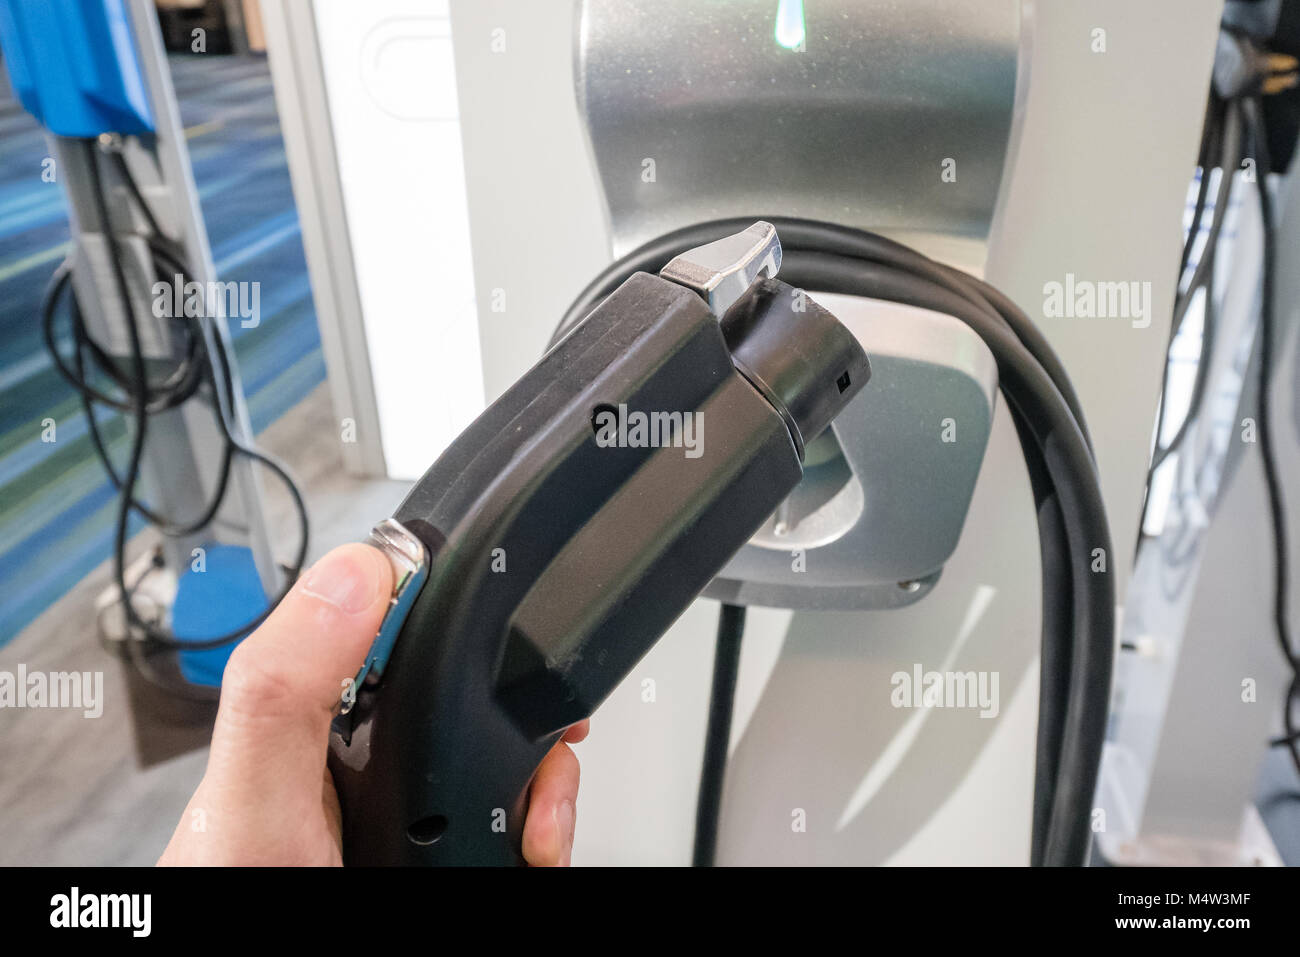 holding electric car charger Stock Photo